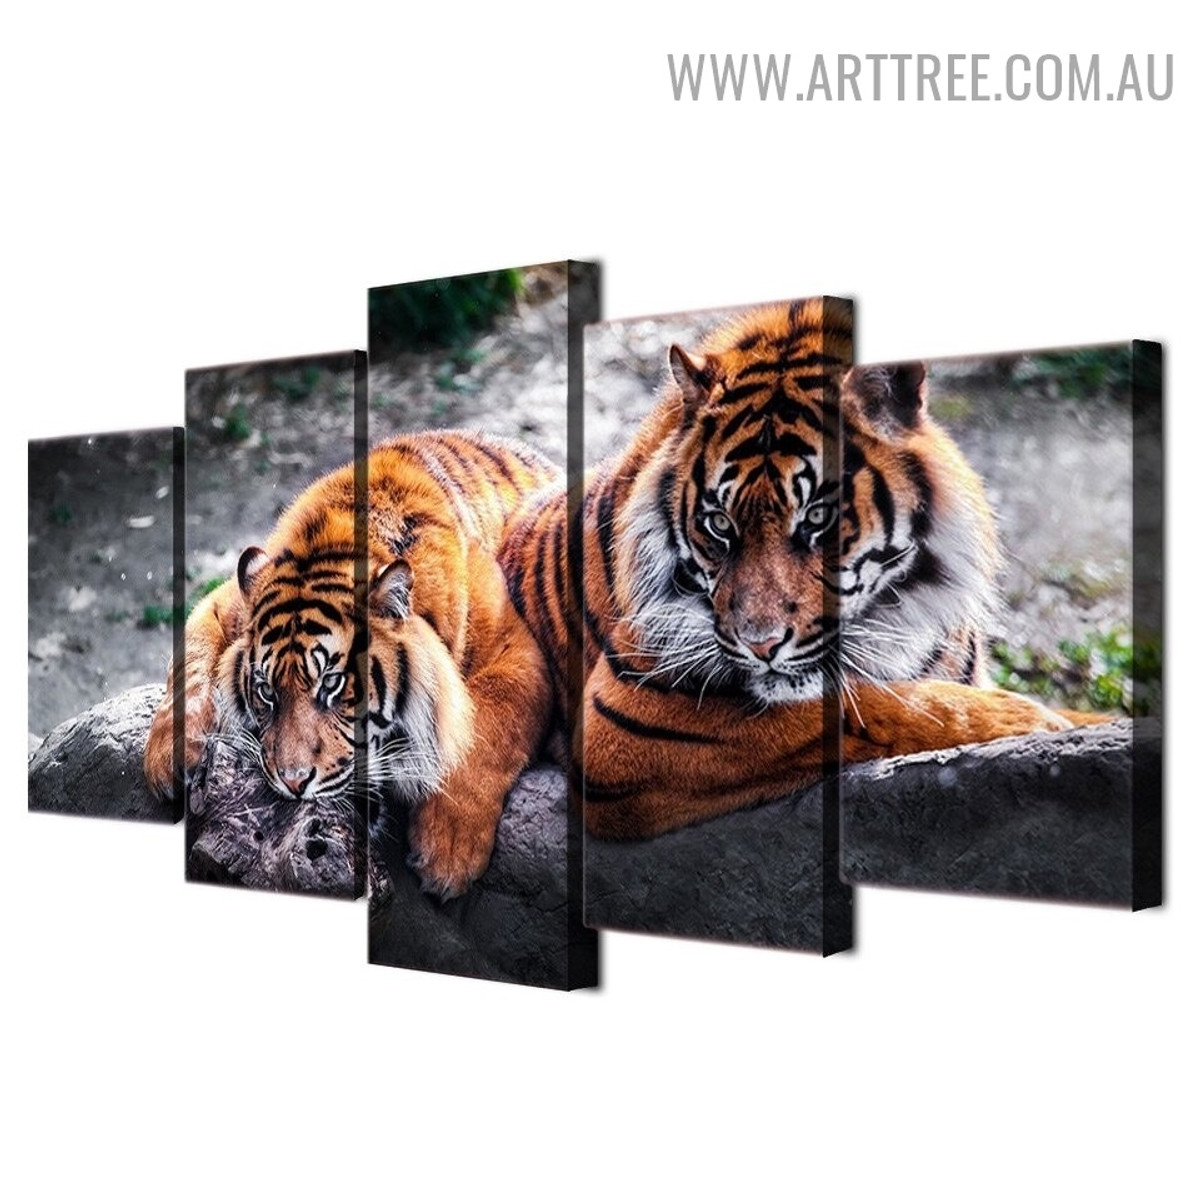 Real Tigers Sky Animal Modern 5 Piece Large Size Floral Artwork Image Canvas Print for Room Wall Garniture